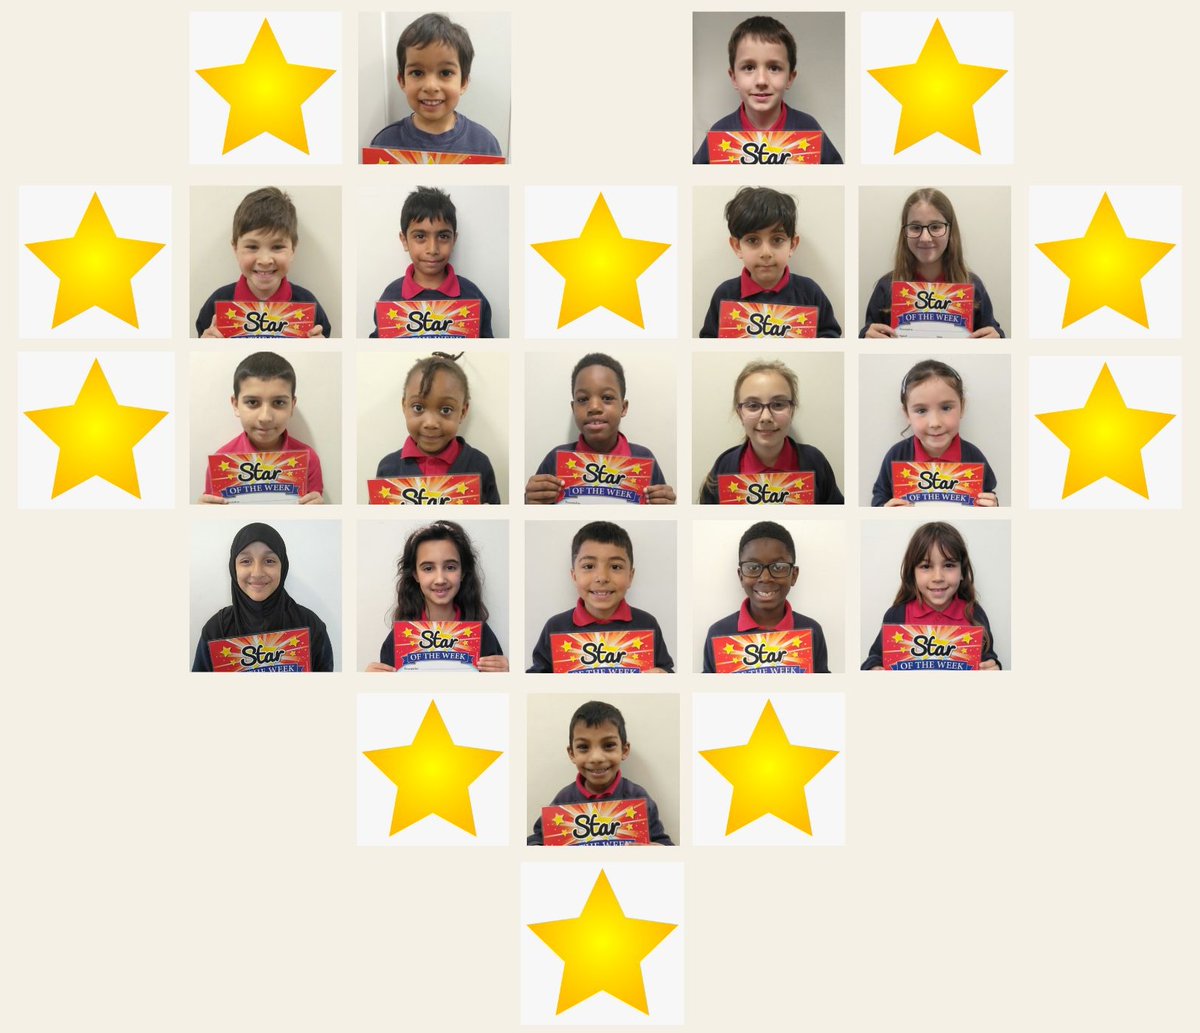 🌟 Celebrating our School Stars of the Week! 🌟🤩👏 Huge congrats to these exceptional individuals who've truly shone with their dedication, kindness, and outstanding achievements. Keep lighting up our school community! #ExcellenceForAll #GrantonFamily #LeadingTheWay